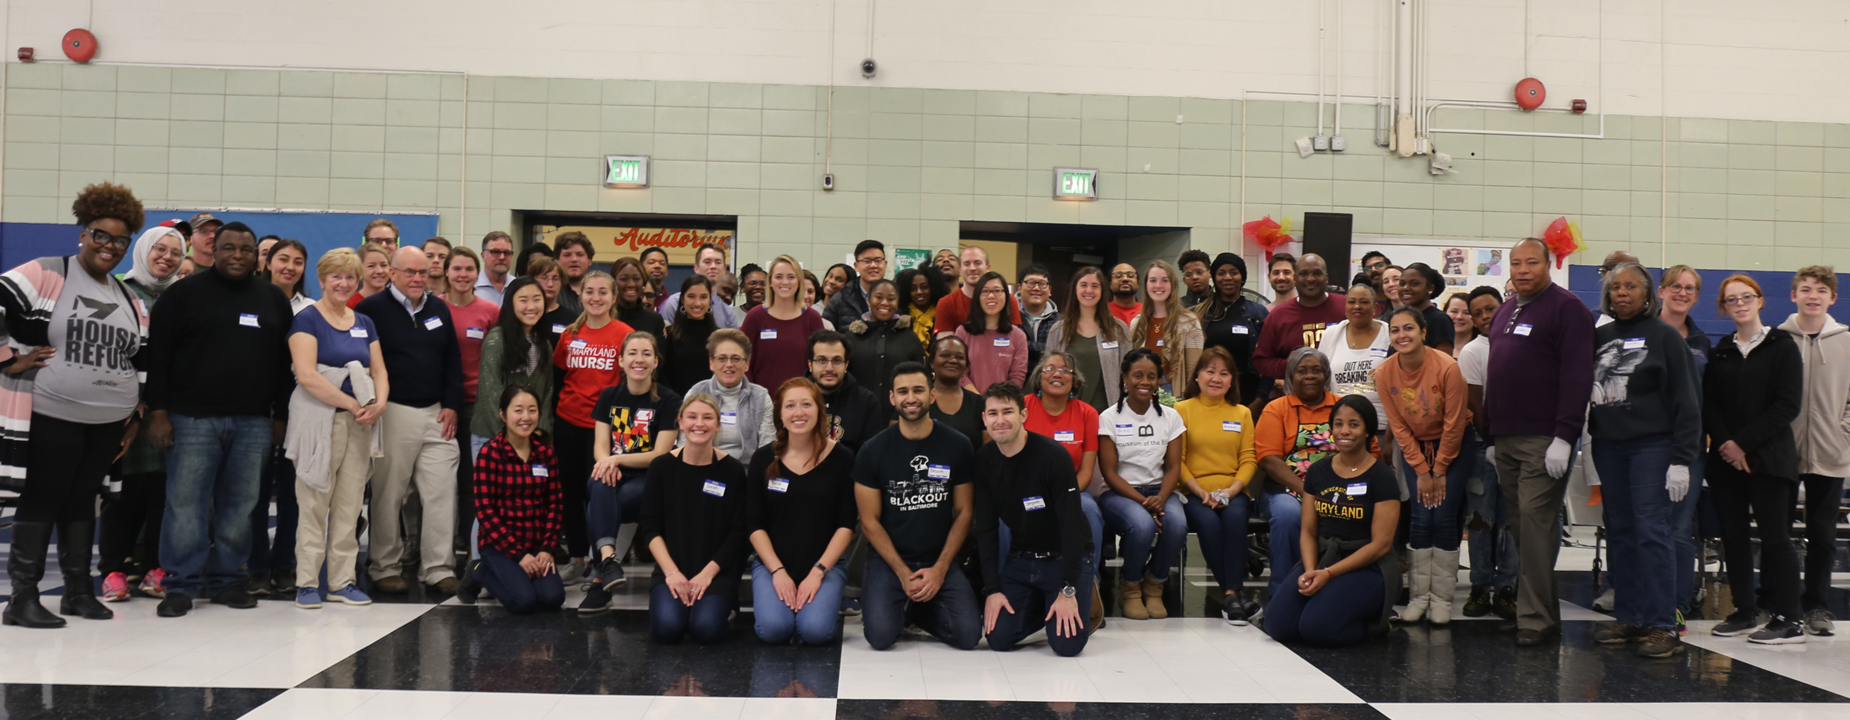 Dozens of 2019 Project Feast volunteers prepare to begin serving on Thanksgiving Day as they gather with School of Medicine organizers Sarah Heaps, Isabelle Lock, Nevin Varghese, and Stephen Semick, left to right, first row; and Rami Yanes, fourth from left, second row.